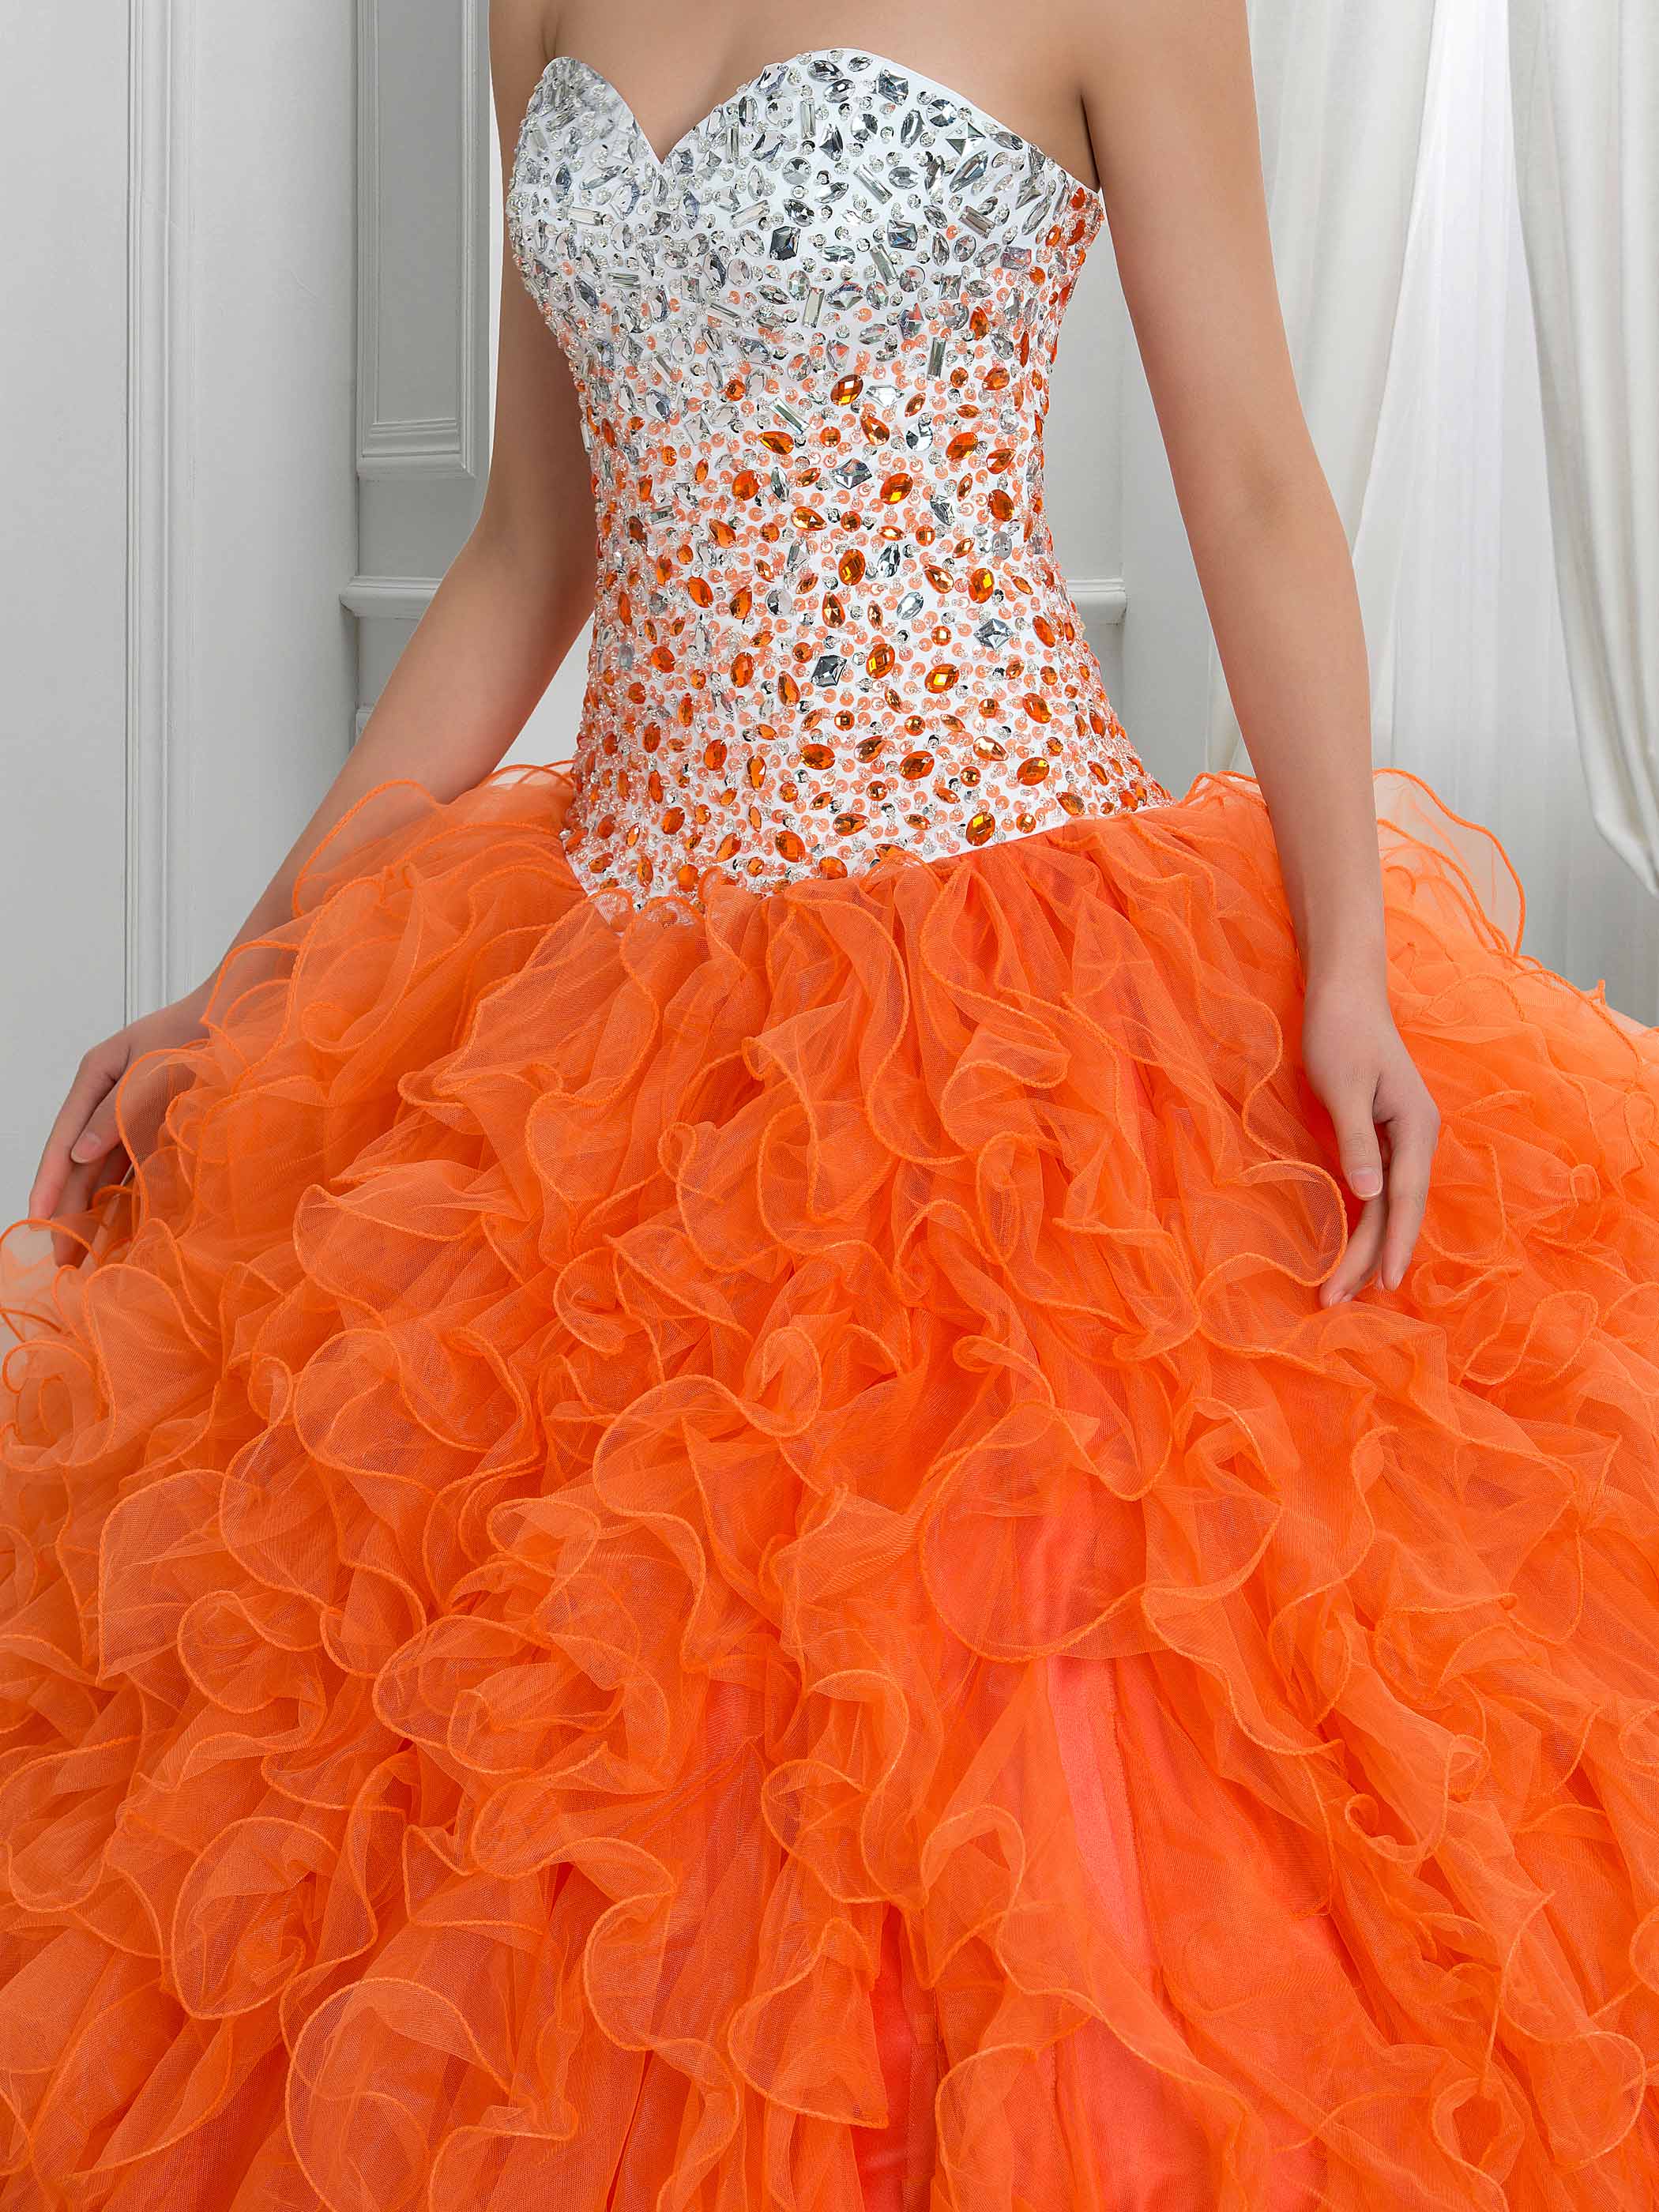 Ericdress Sweetheart Crystal Ruffles Ball Gown Quinceanera Dress With Jacket/Shawl